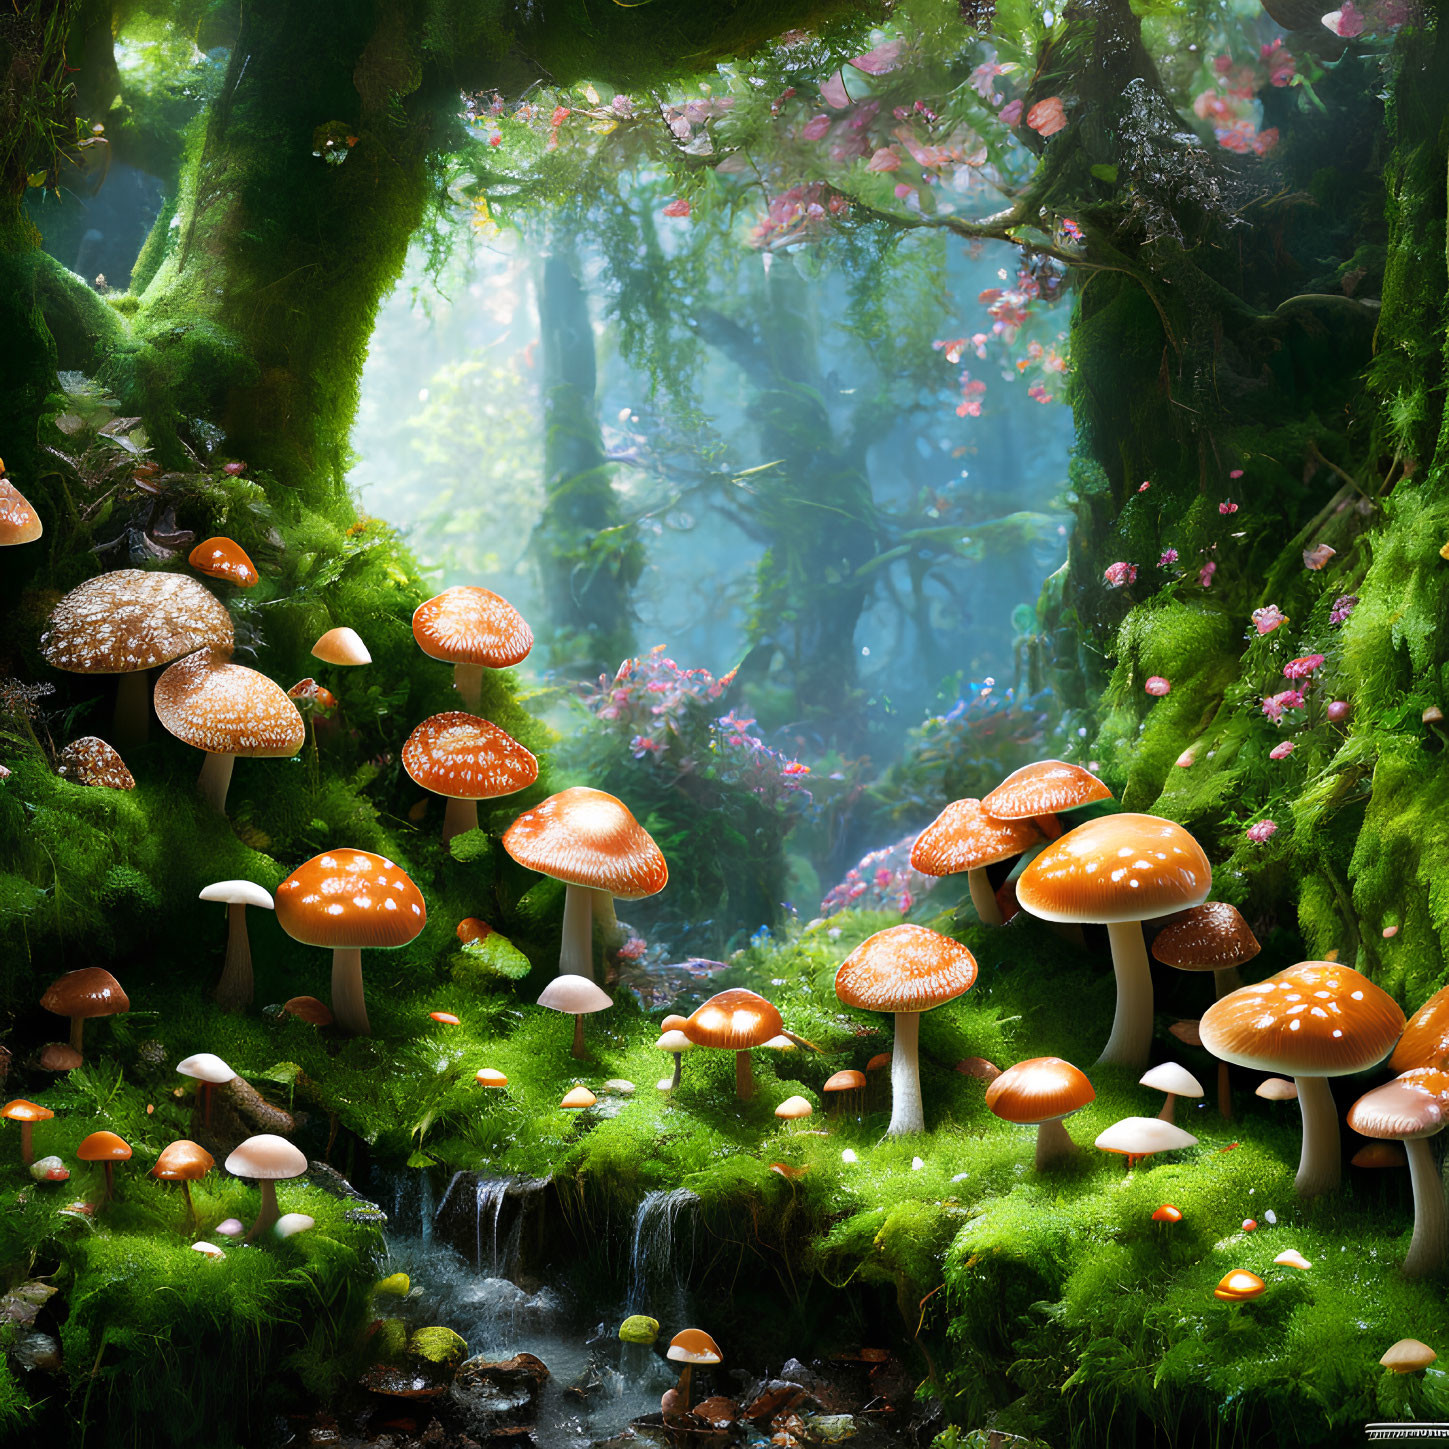 Enchanting forest scene with orange mushrooms, waterfall, and ethereal light.